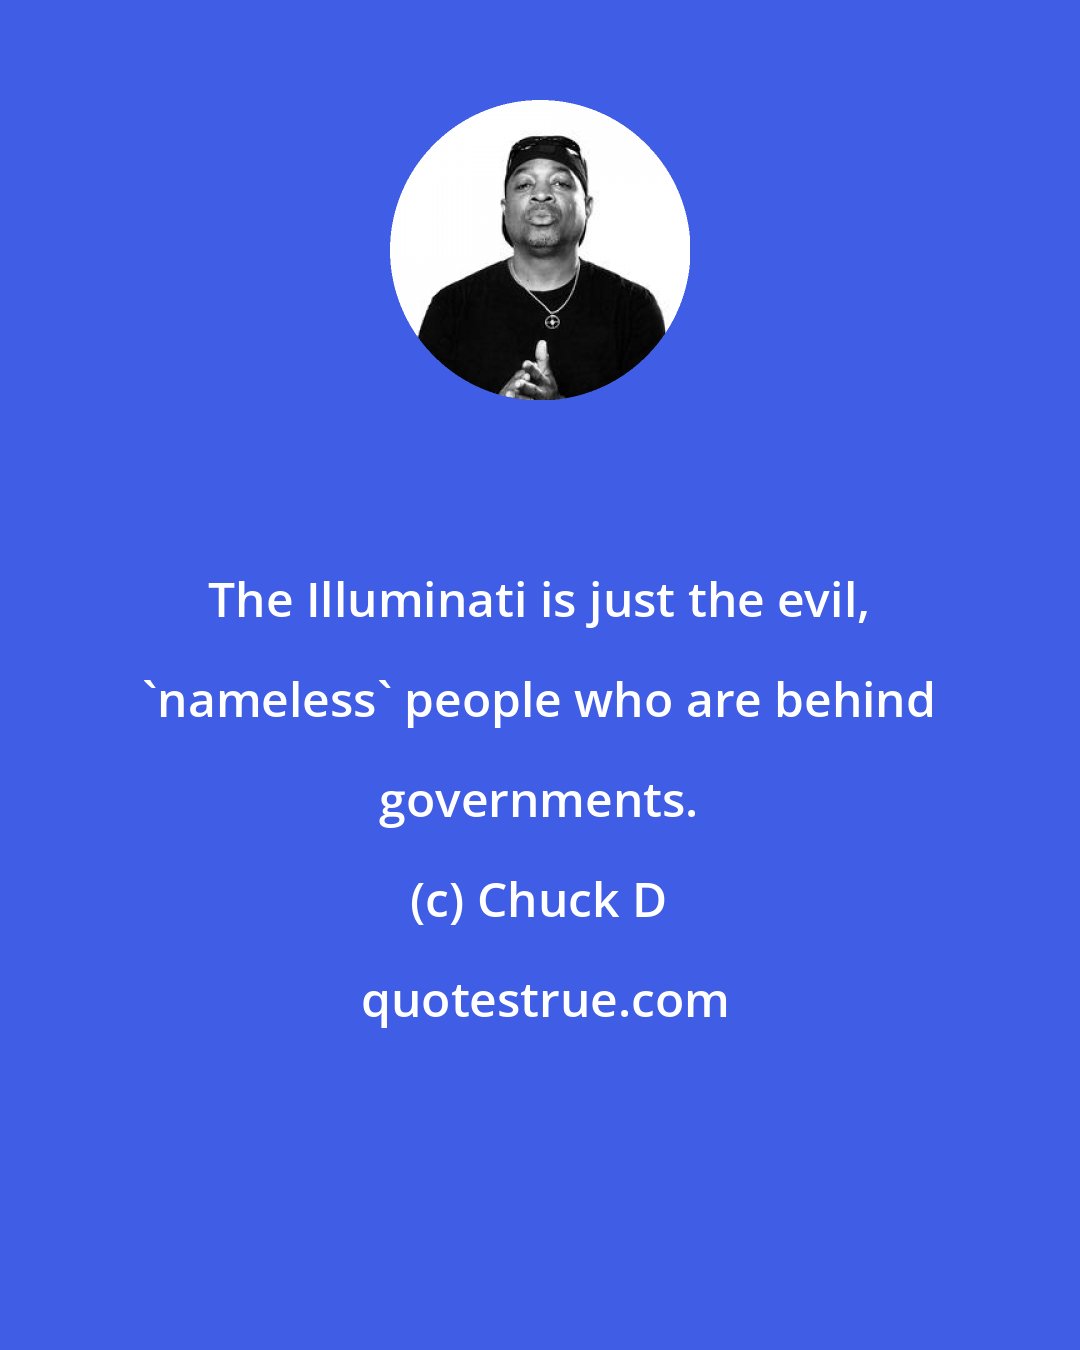 Chuck D: The Illuminati is just the evil, 'nameless' people who are behind governments.